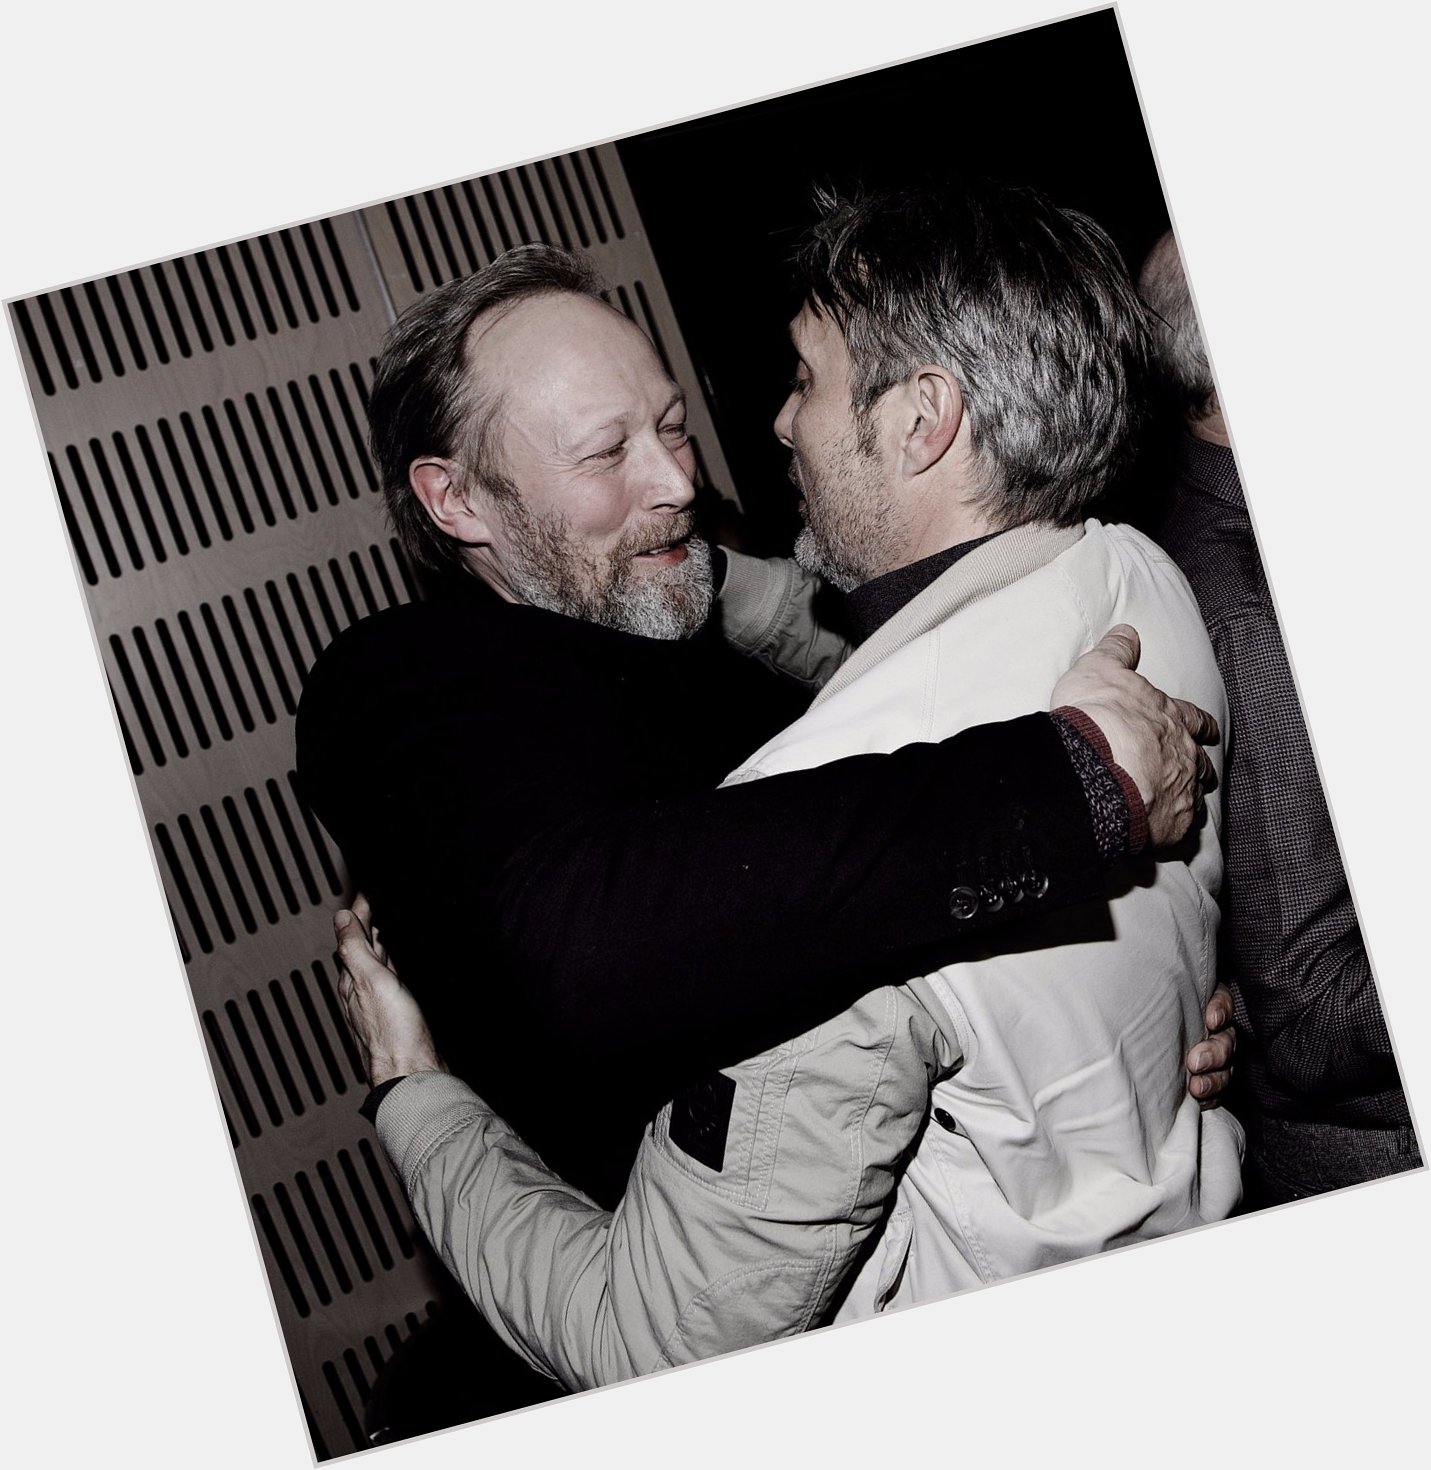 Happy Birthday to the amazing and talented Lars Mikkelsen!  